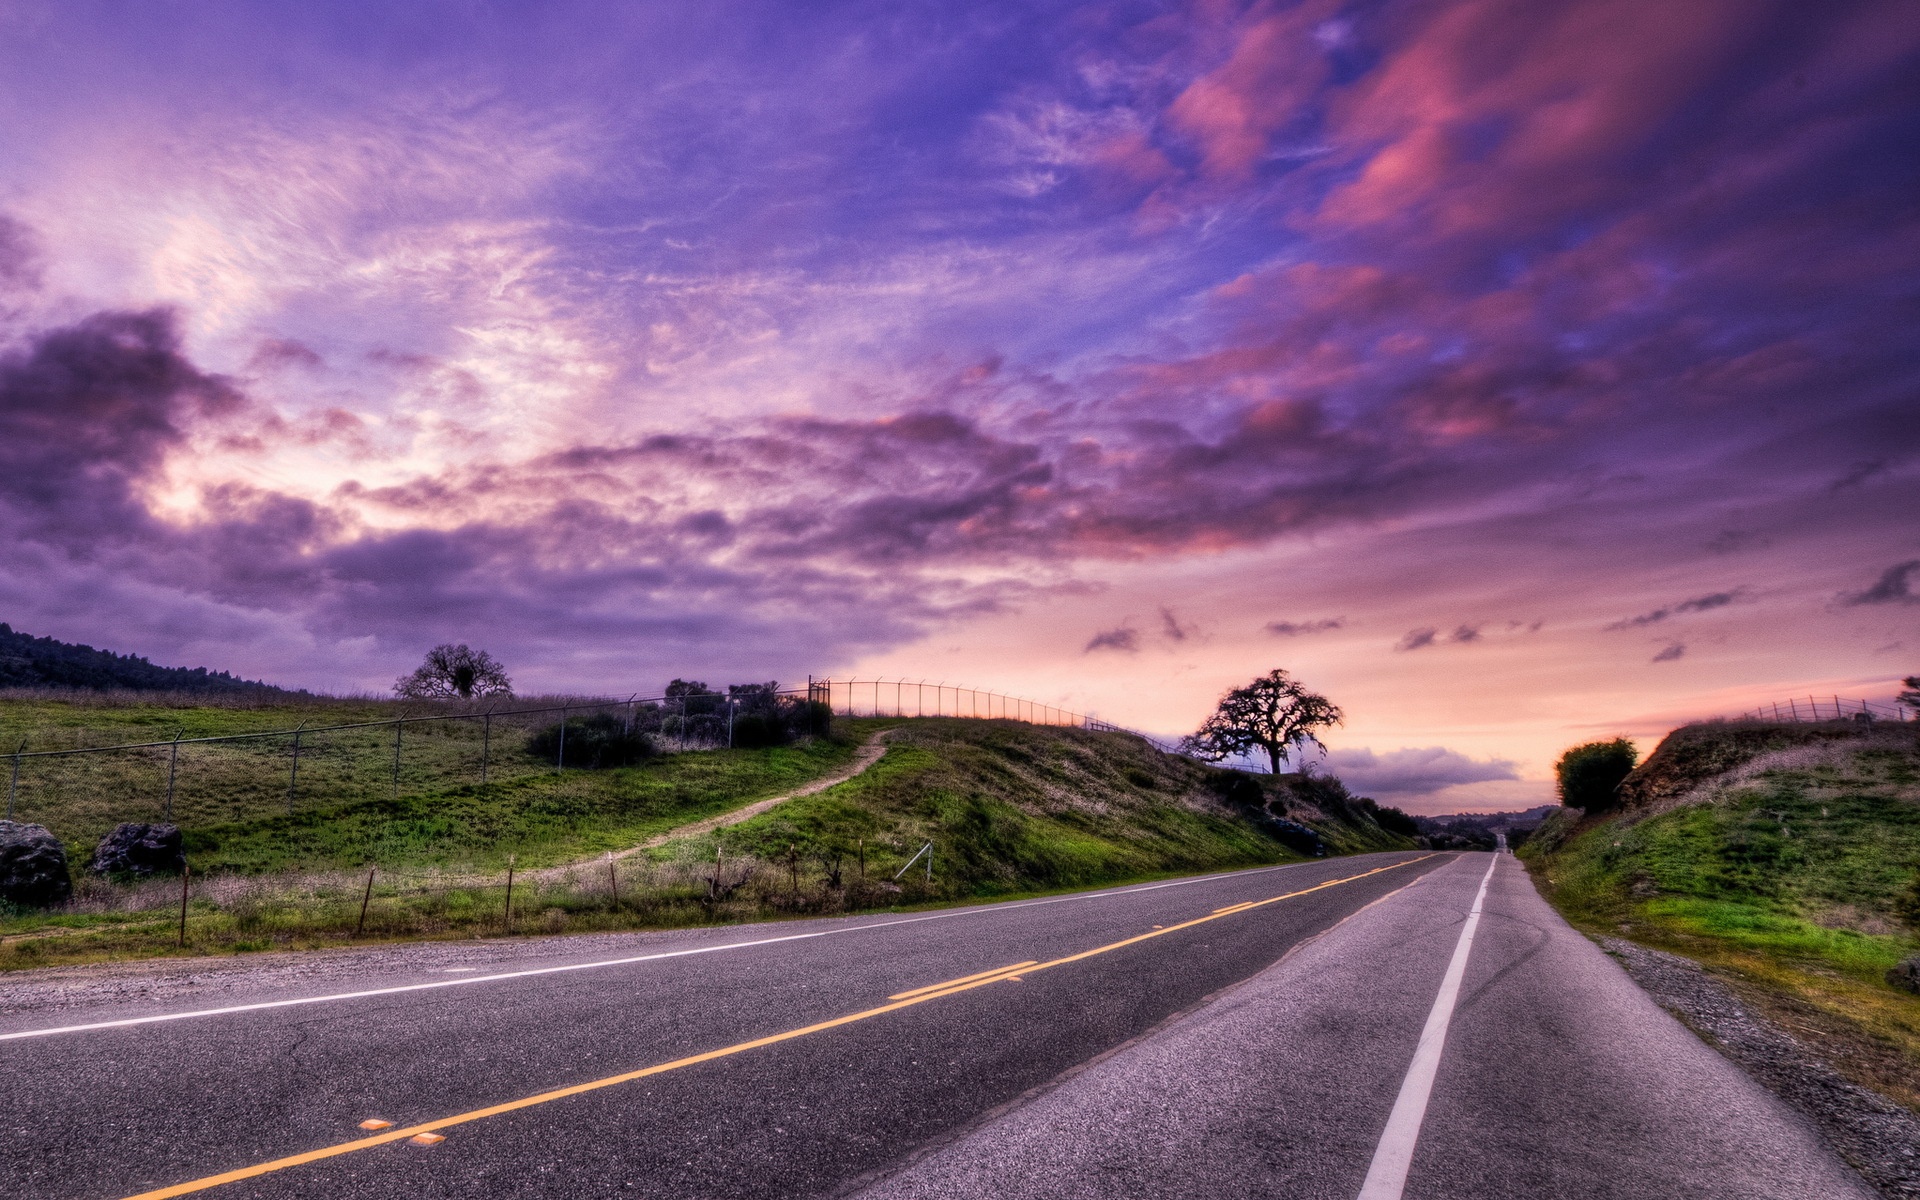 Sunset Road Landscape Wallpapers   1920x1200   984261